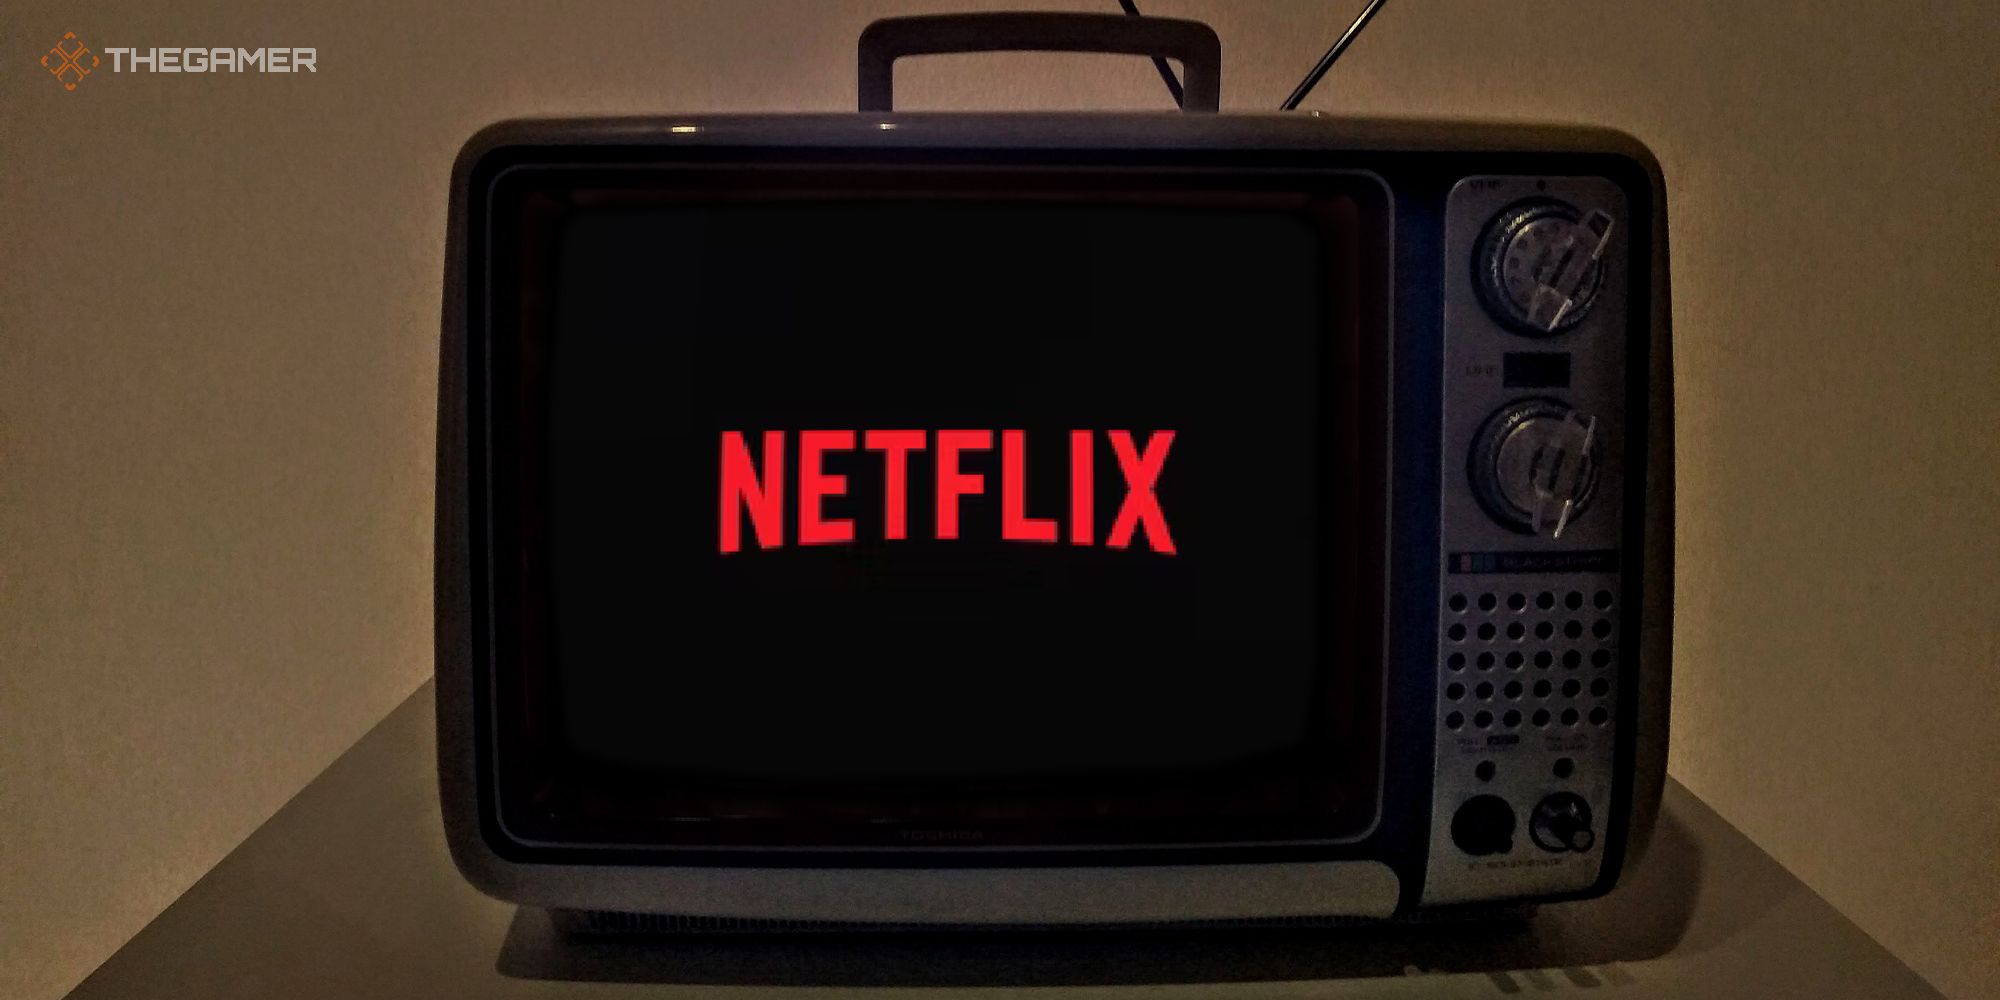 Netflix logo in an old crt television